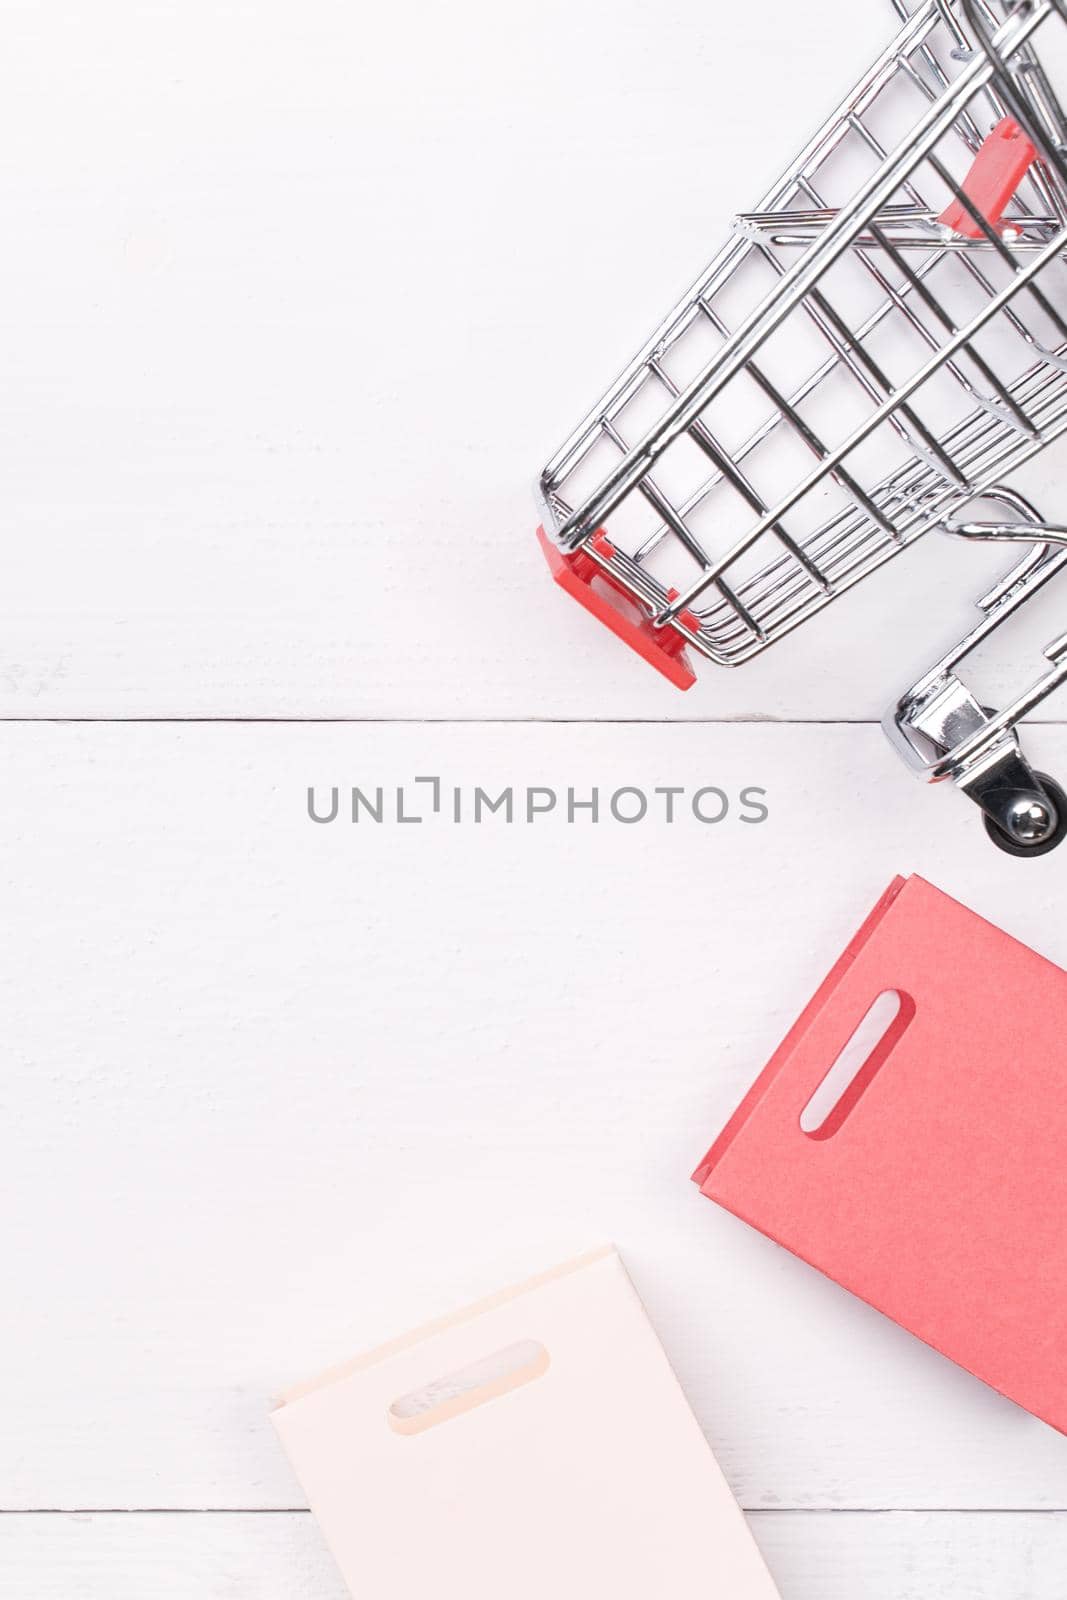 Abstract design element,annual sale,shopping season concept,mini cart with colorful paper bag on white wooden table background,top view,flat lay by ROMIXIMAGE